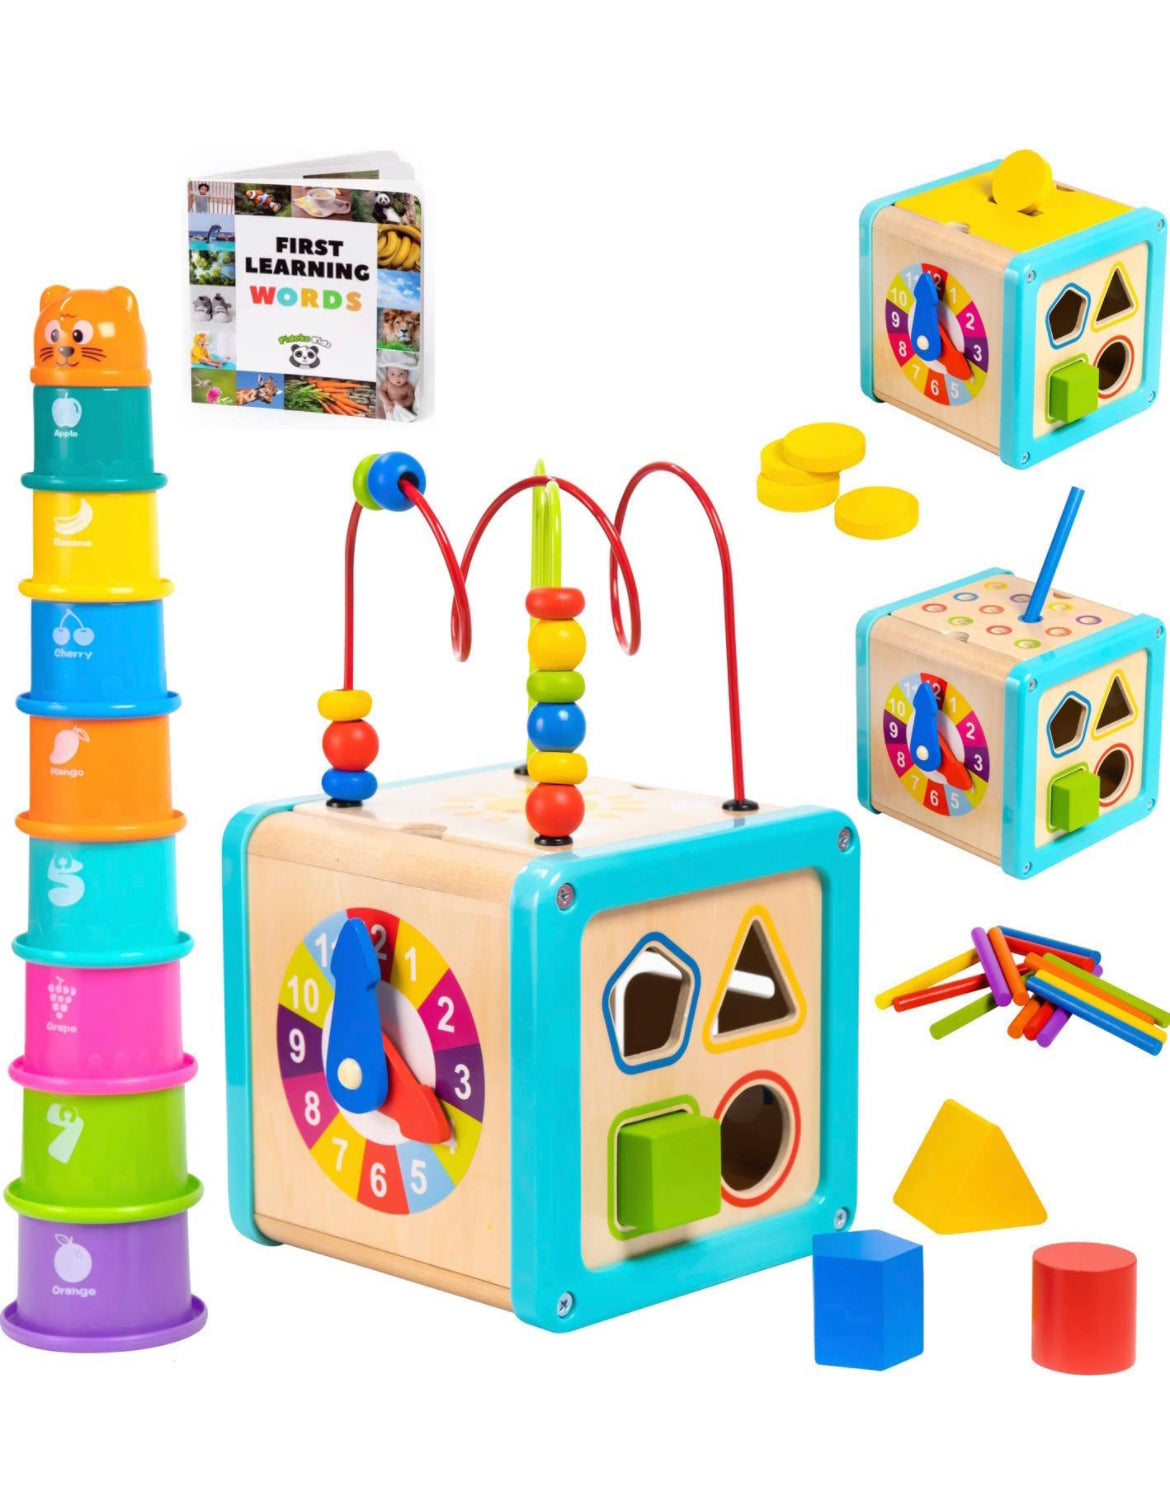 Baby Stacking Cups Toys For One Year Old Development Game Learn